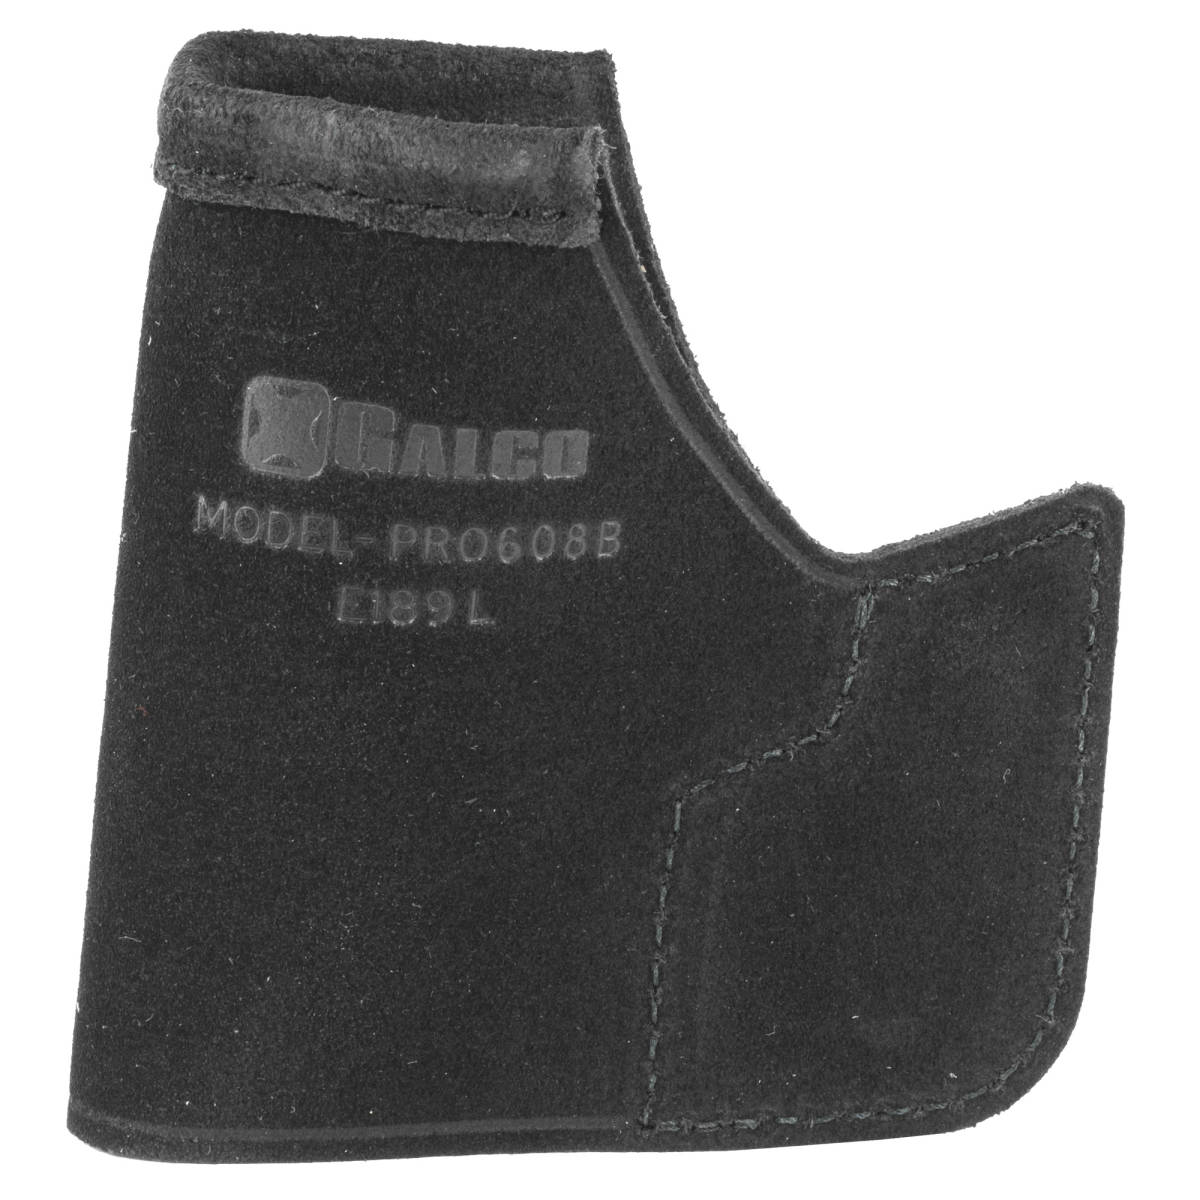 Galco PRO608B Pocket Protector Black Leather Fits Sig P238 Springfield...-img-1